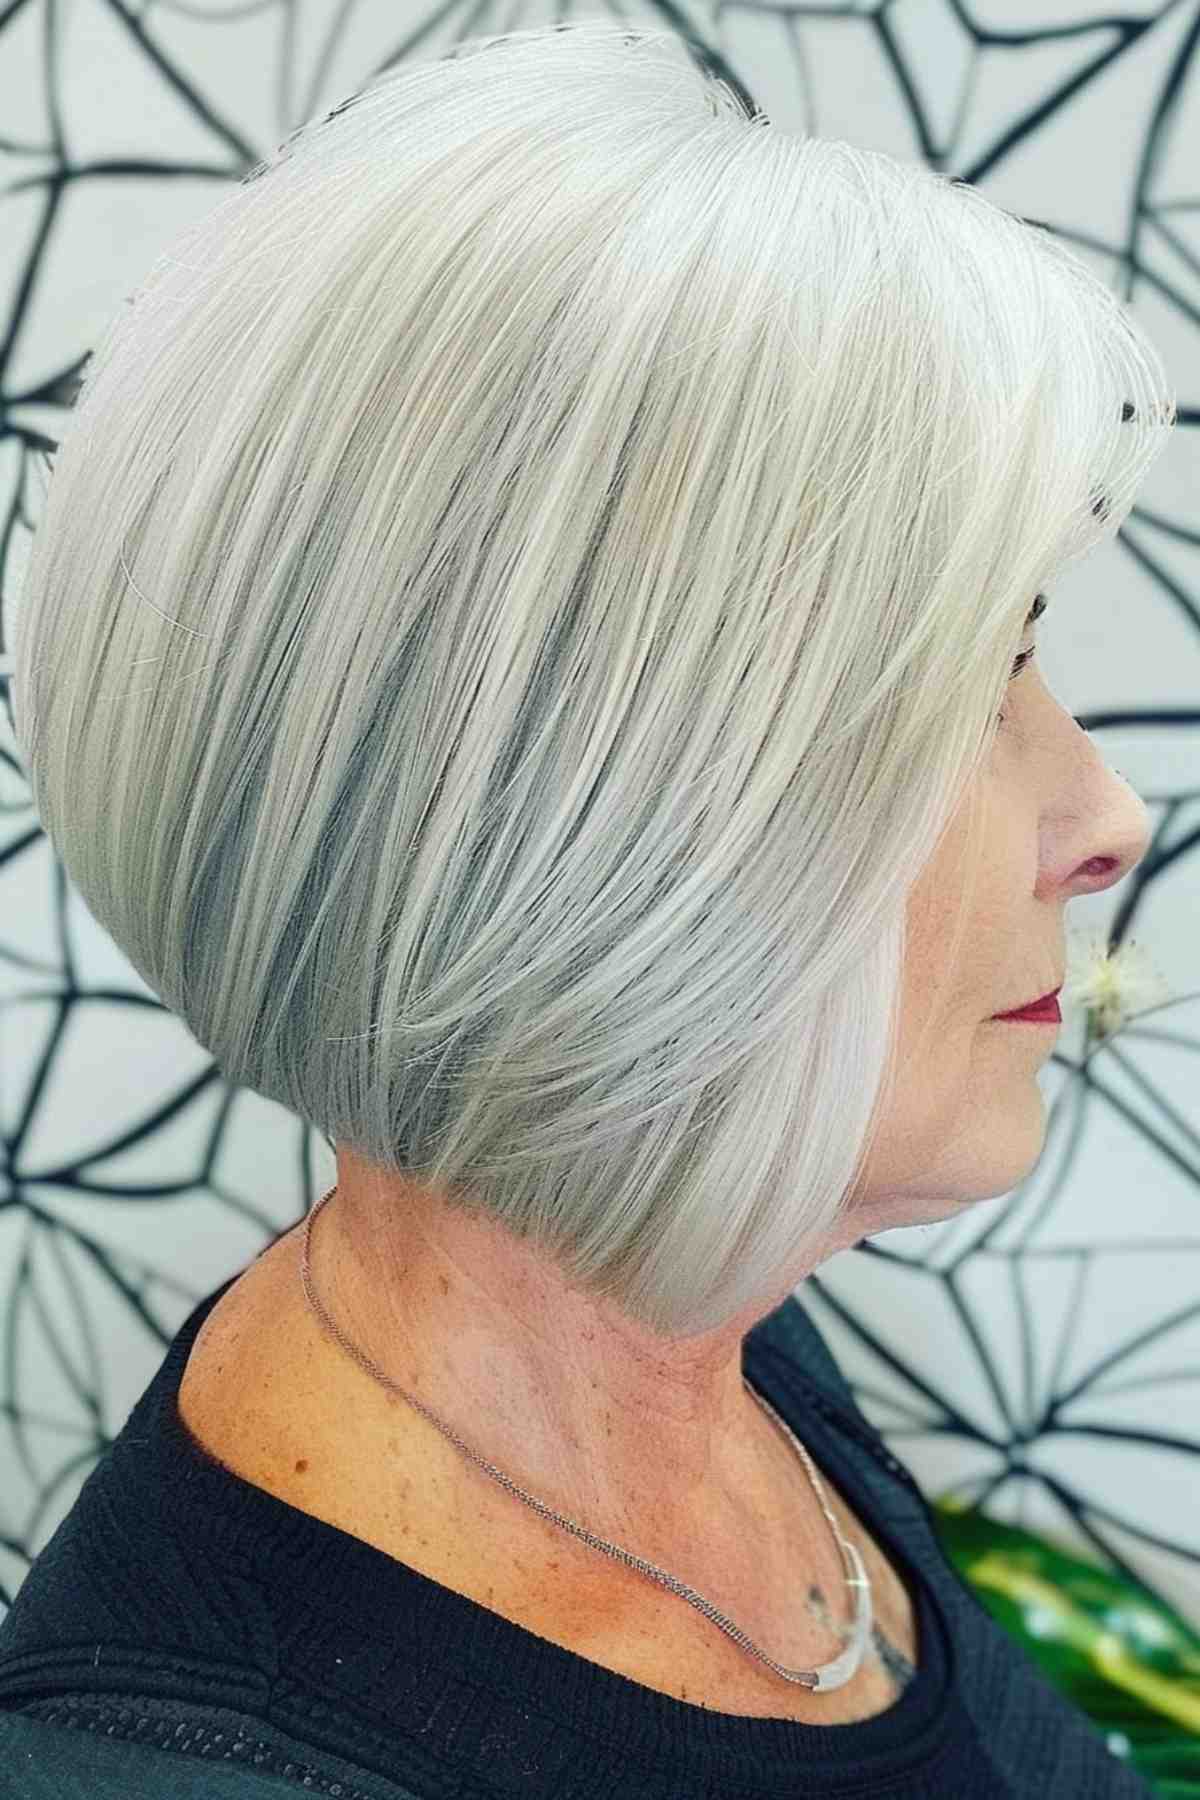 Chic graduated bob haircut for older women with silver-white hair